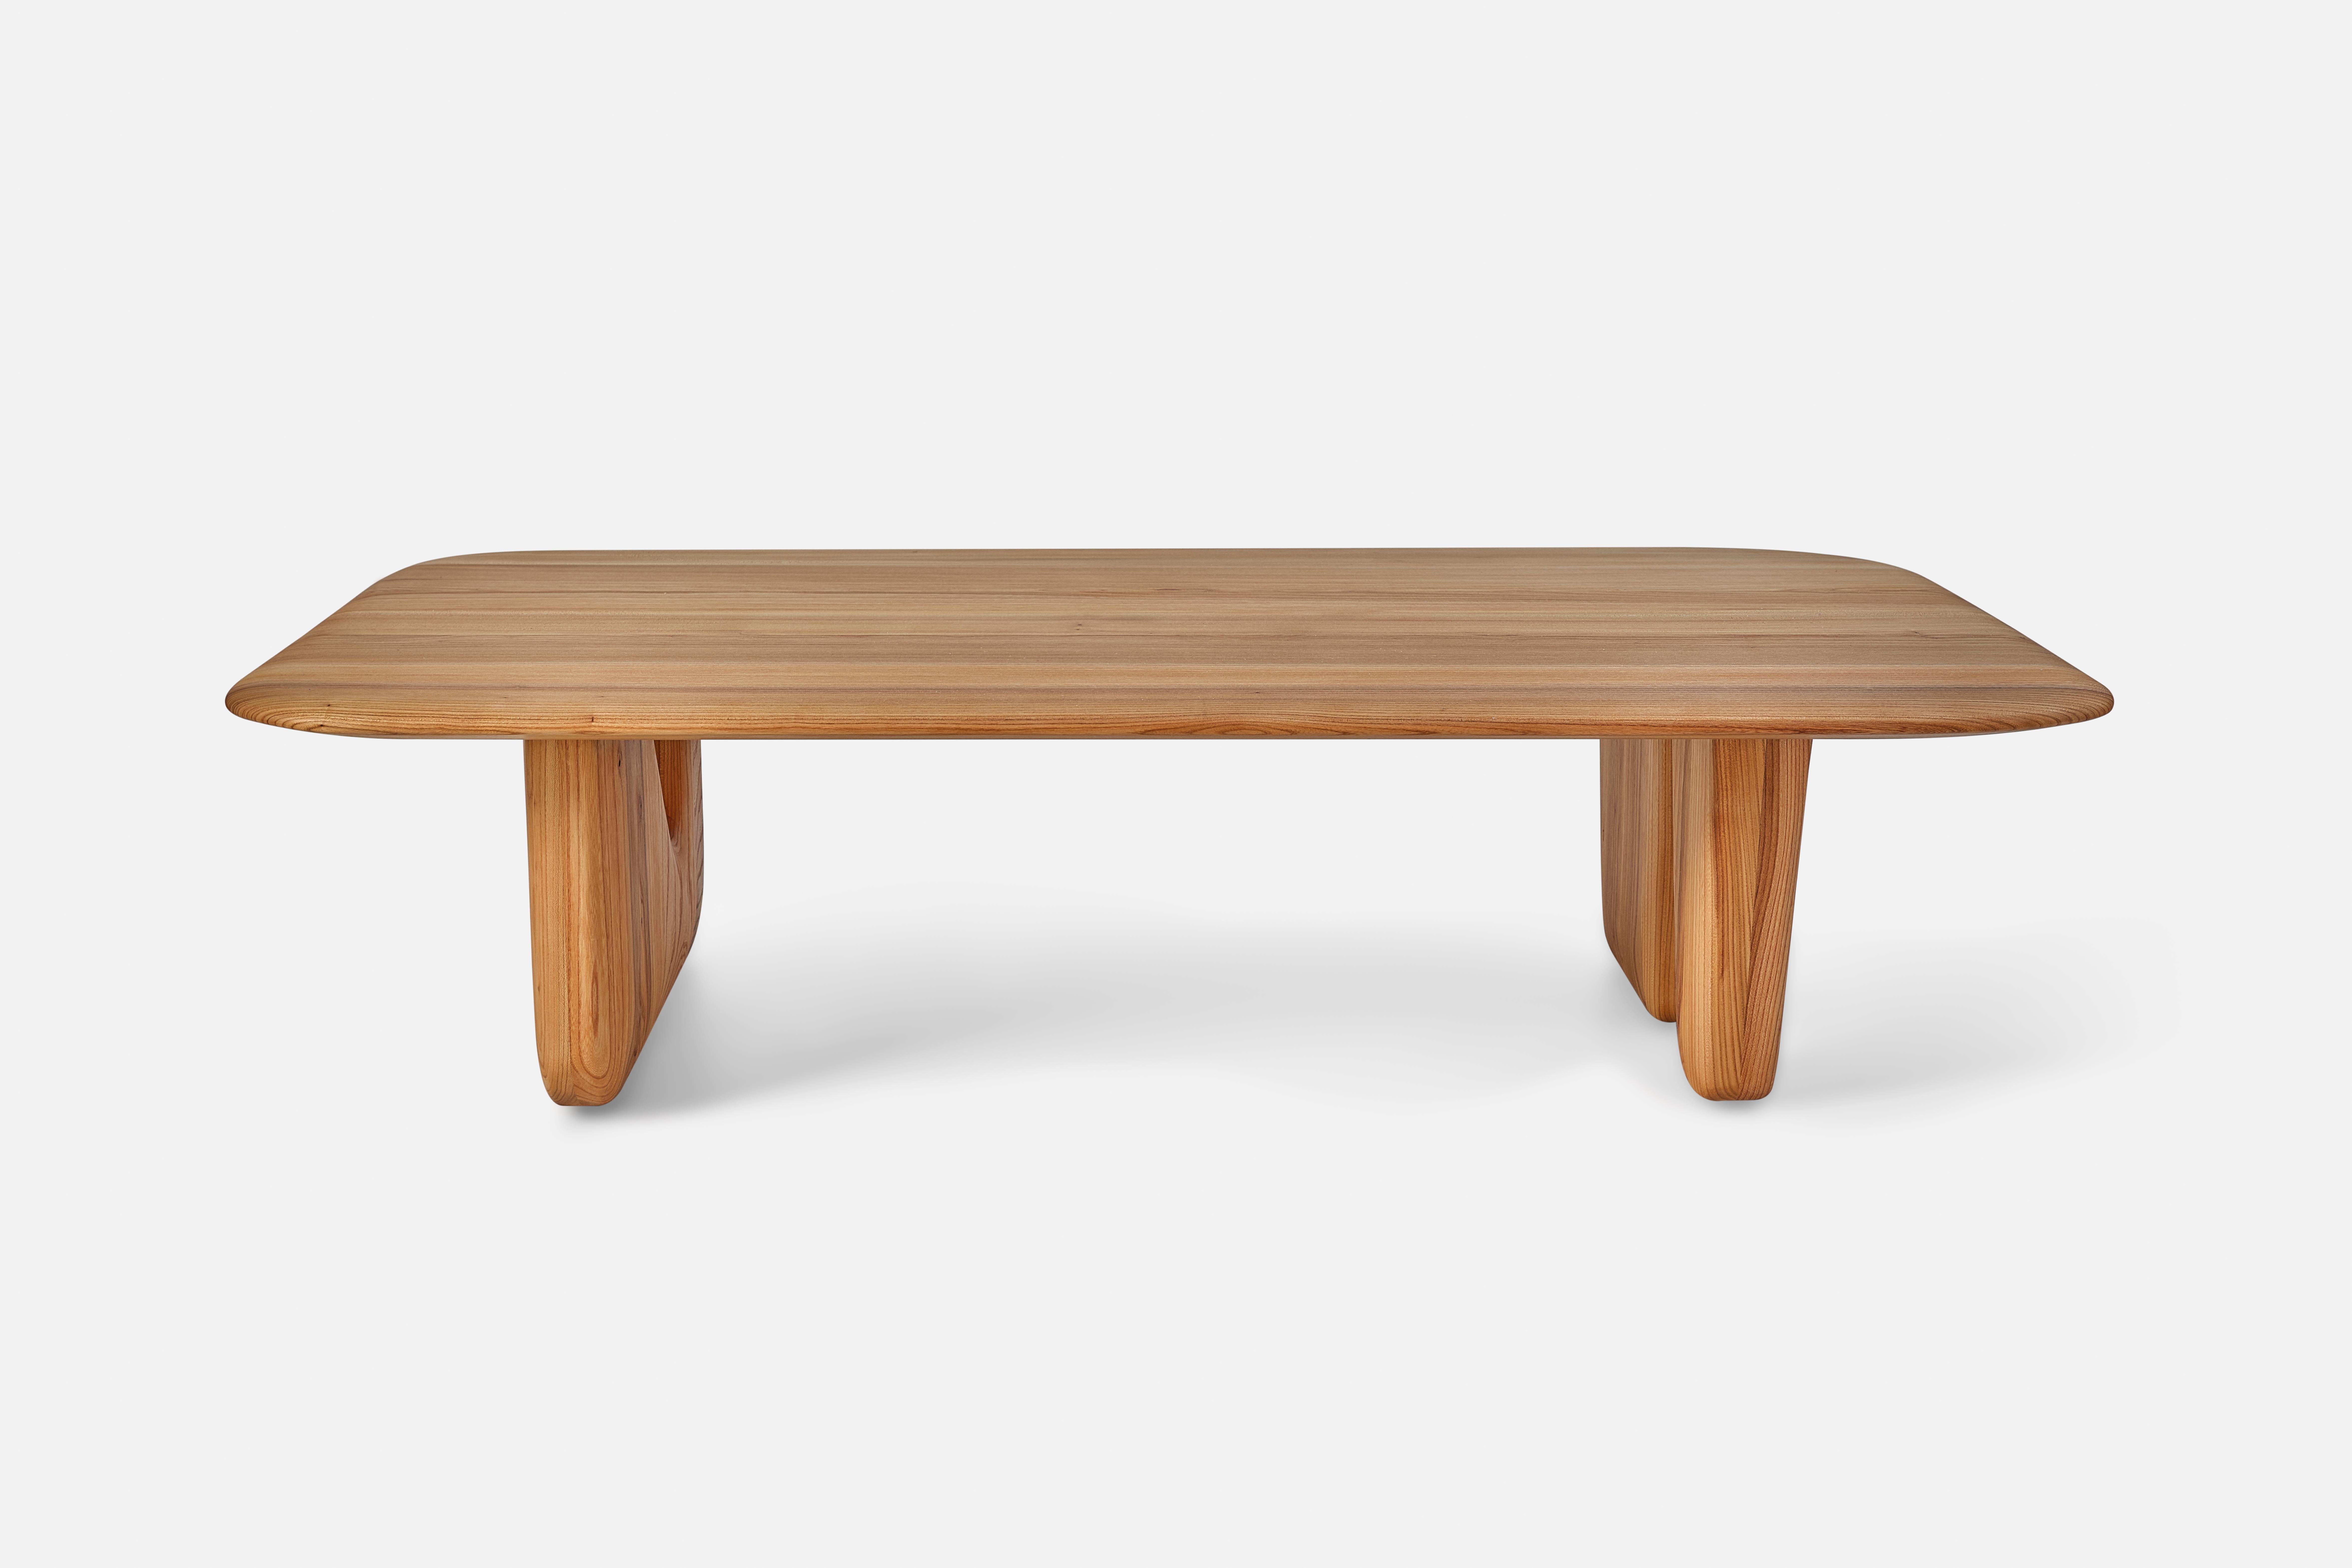 Halach Low Table M by Contemporary Ecowood
Dimensions: W 95 x D 162 x H 41 cm.
Materials: American Oak.
Color: Natural

Contemporary Ecowood’s story began in a craft workshop in 2009. Our wood passion made us focus on fallen trees in the environment